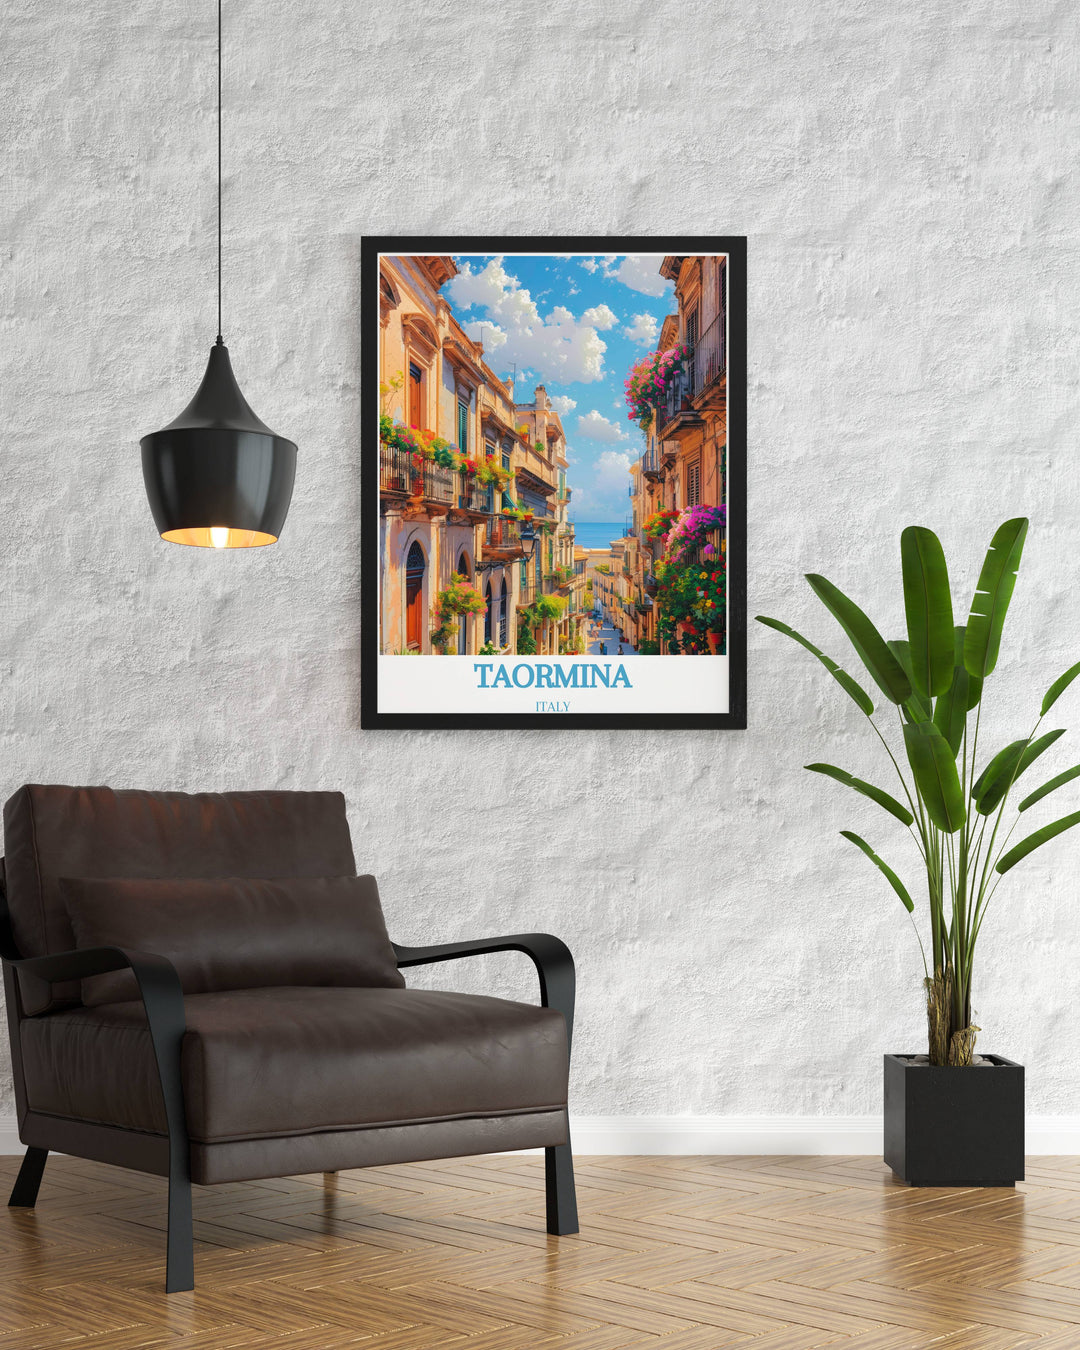 High quality Taormina art print featuring the vibrant life and history of this picturesque Italian town, perfect for enhancing your living room, office, or bedroom with a touch of European elegance.